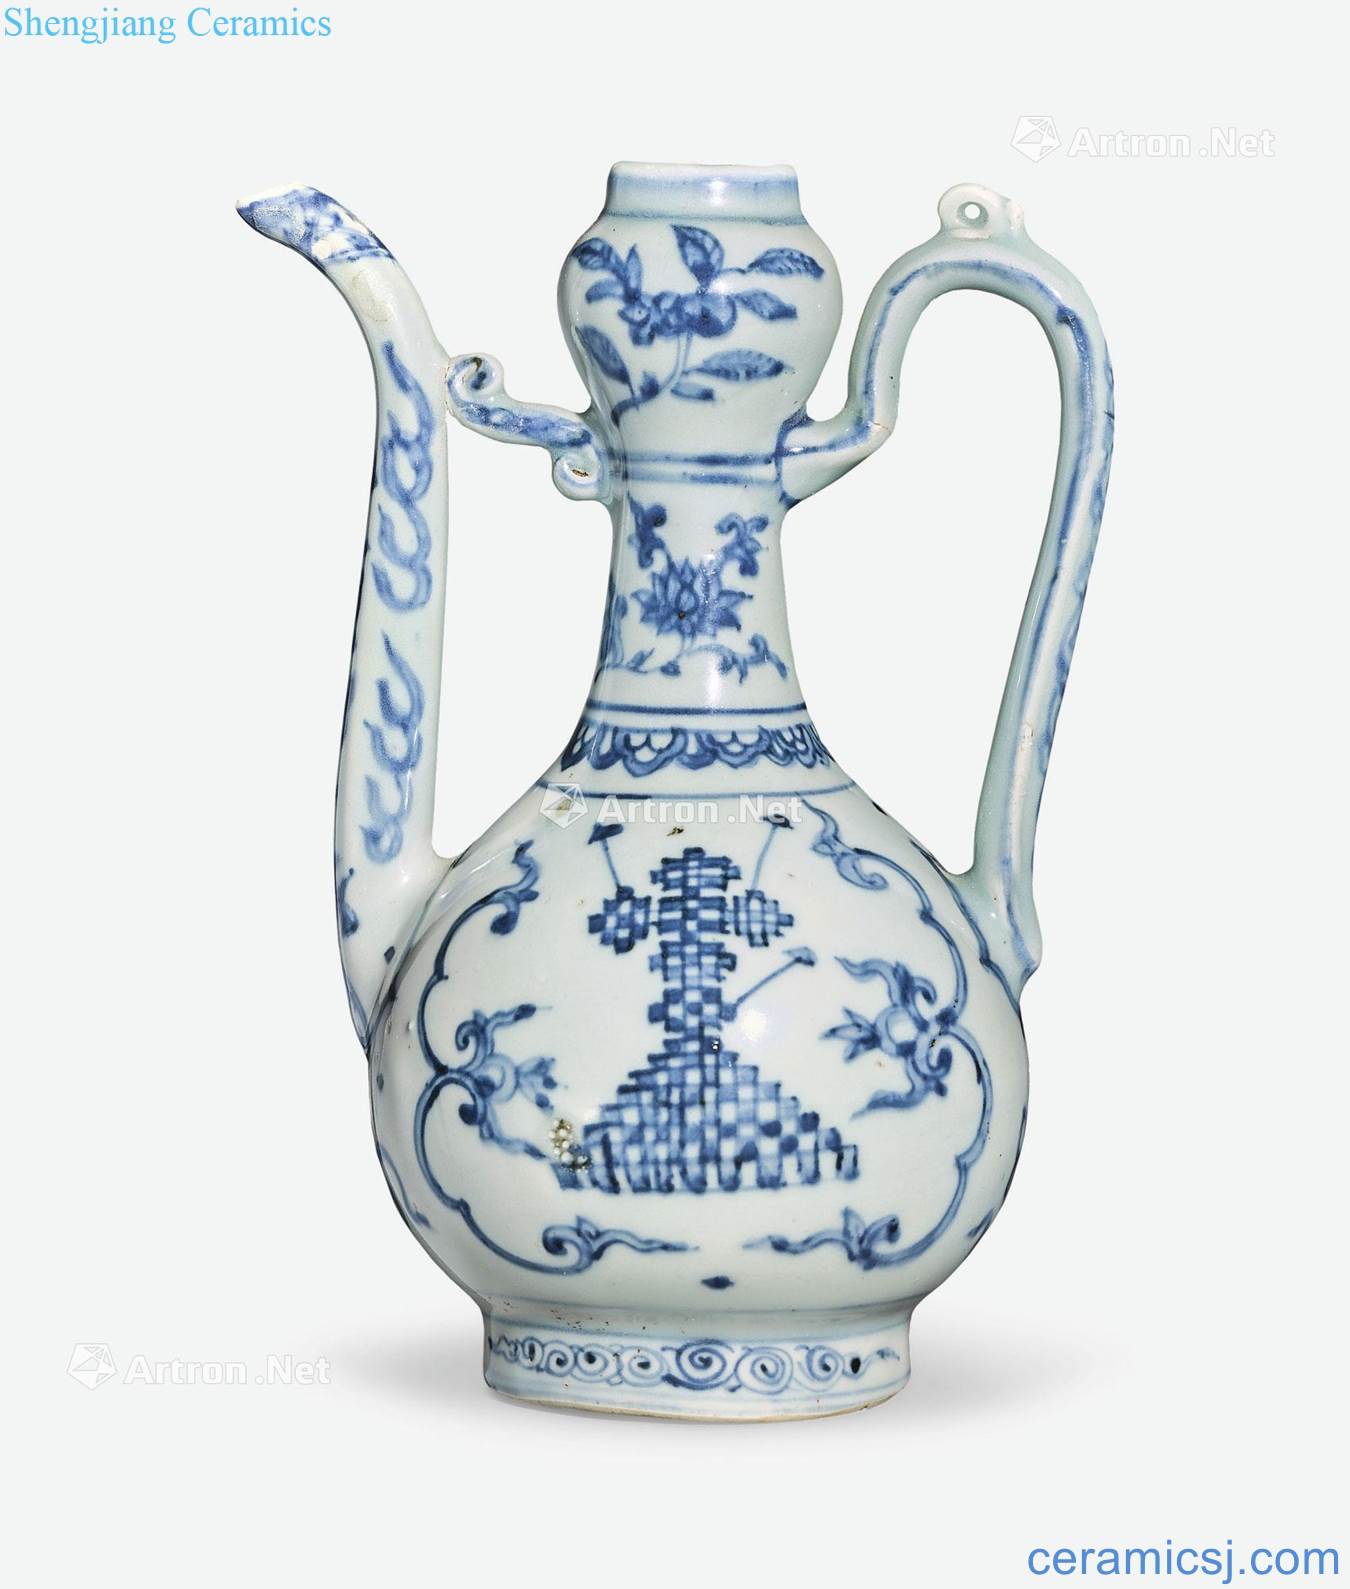 The 16th century Blue and white thefeathermen cross grain ewer